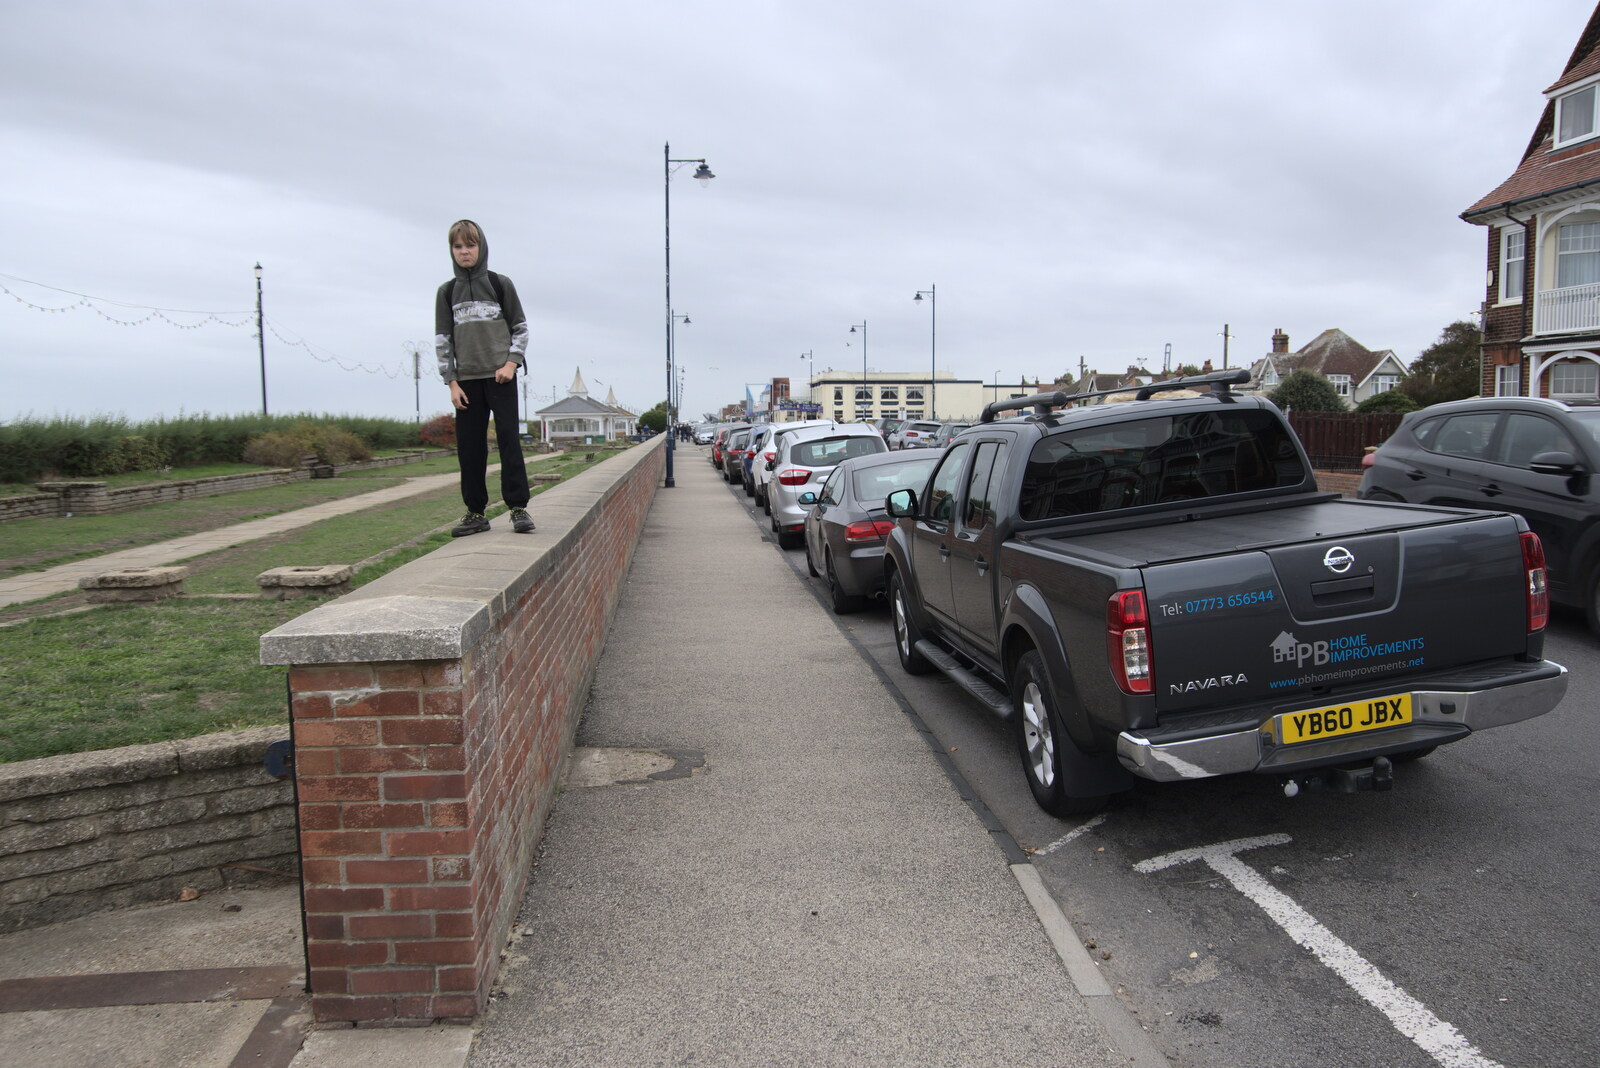 Harry stands on a wall on Sea Road, Felixstowe from A Trip to Landguard Fort, Felixstowe, Suffolk - 16th October 2022